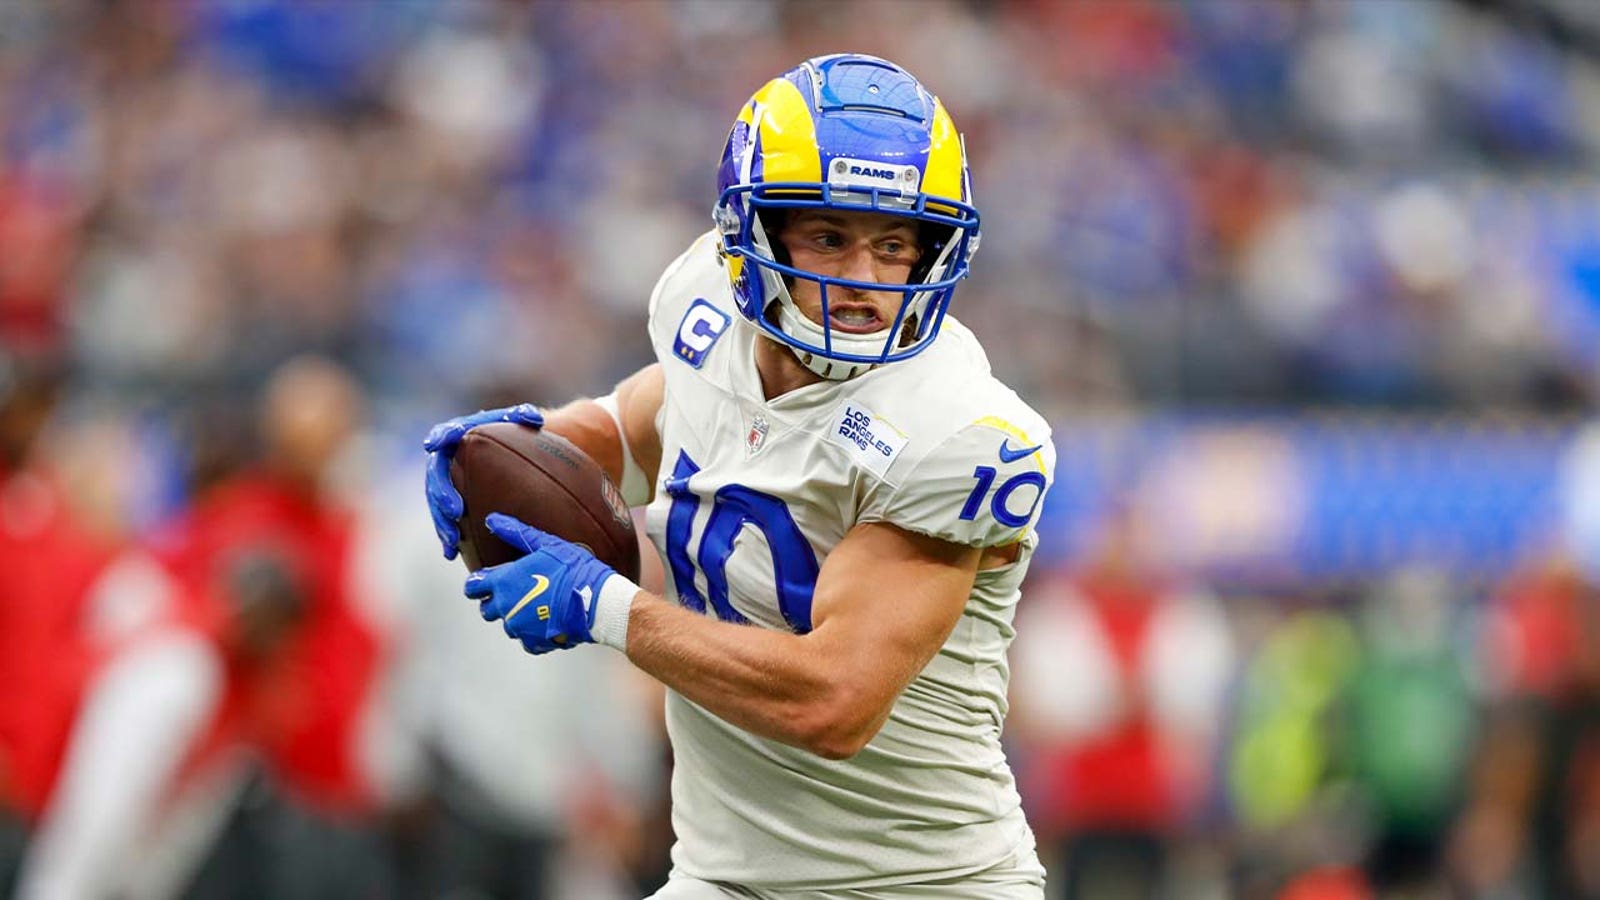 Why Cooper Kupp is the NFL's best receiver